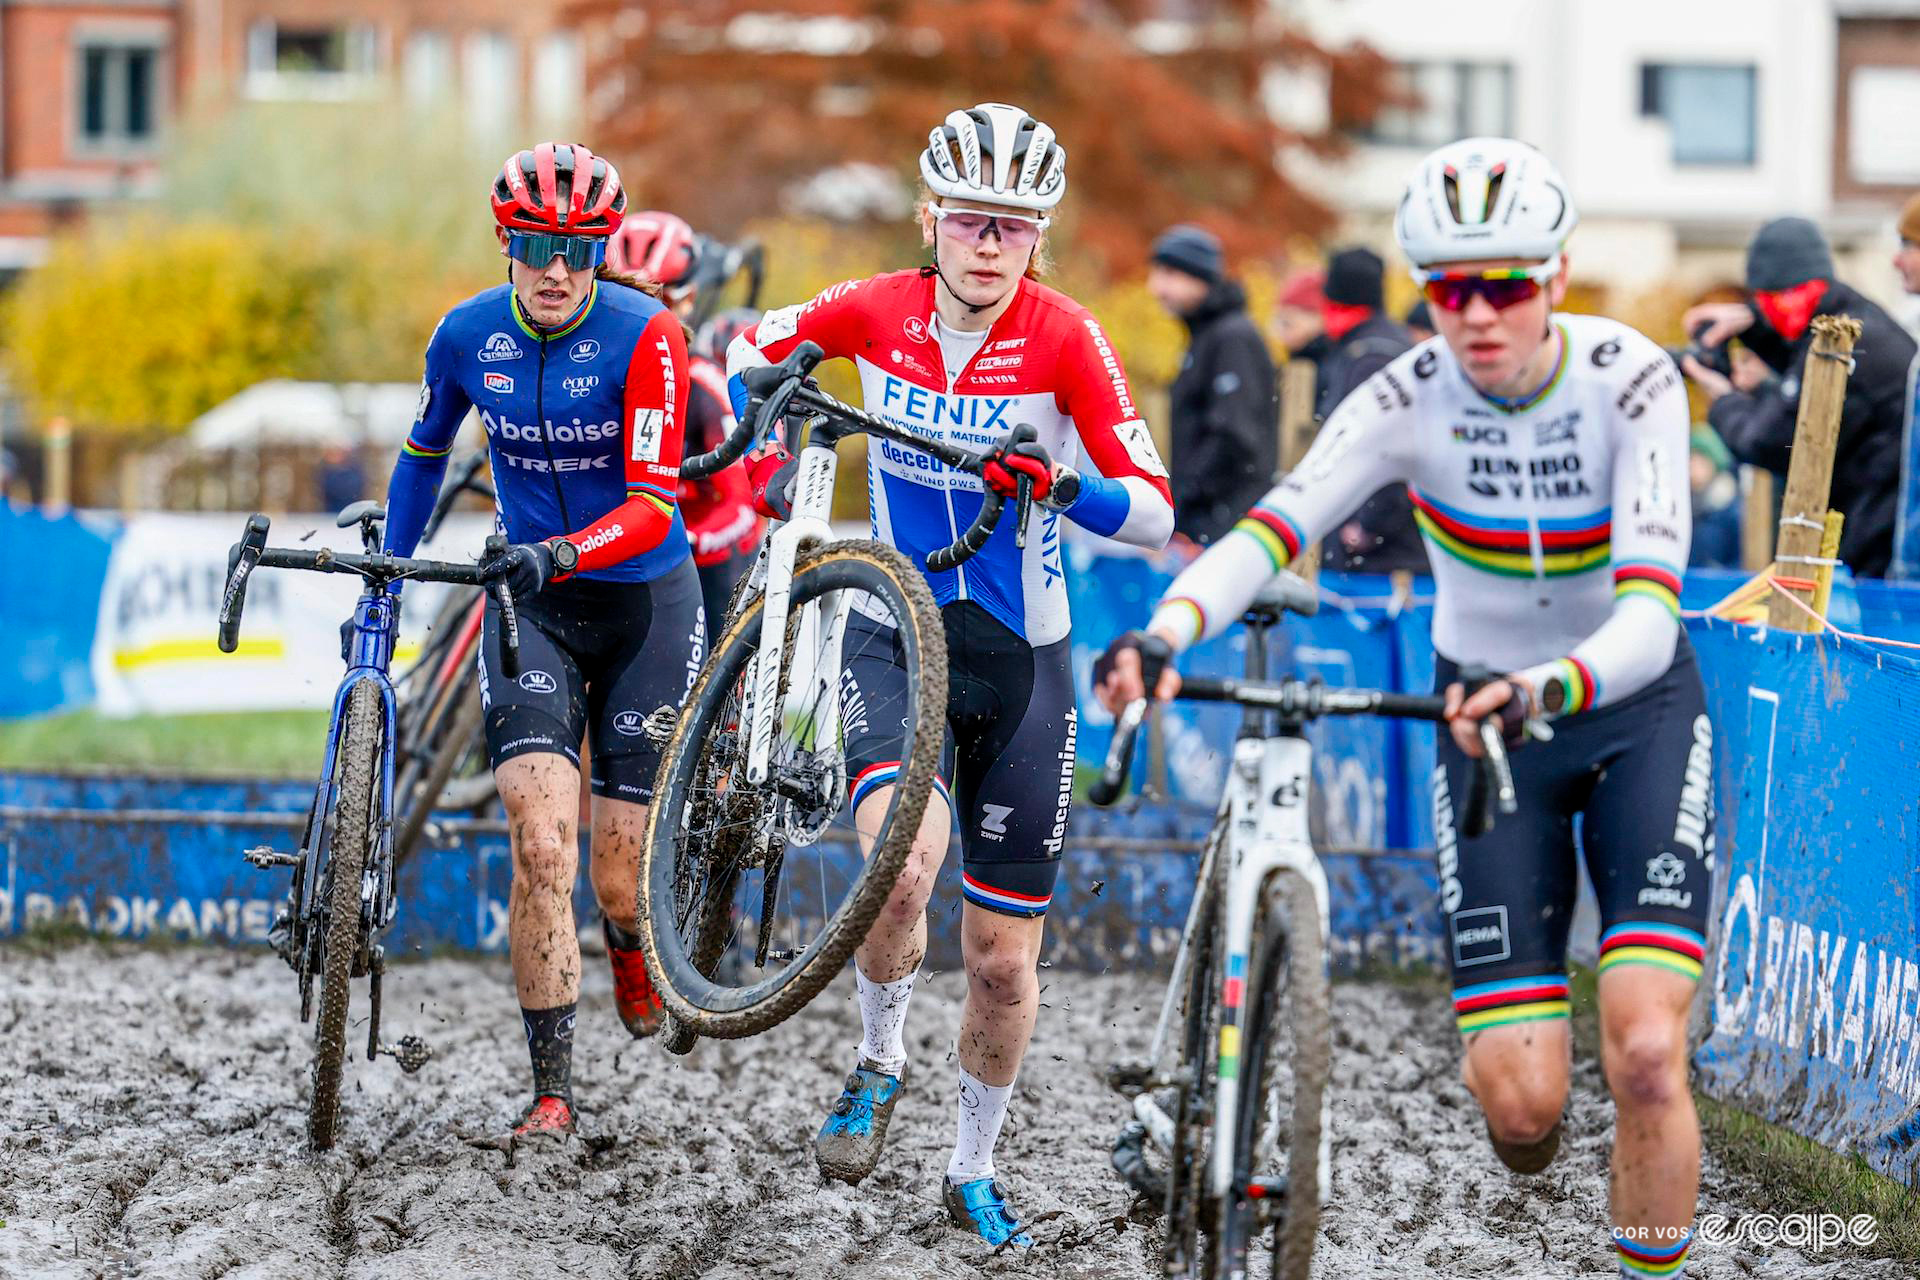 World champion Fem van Empel leads Puck Pieterse, wearing the jersey of Dutch national champion, and Lucinda Brand through the thick mud after the boards early in X20 Trofee Kortrijk.